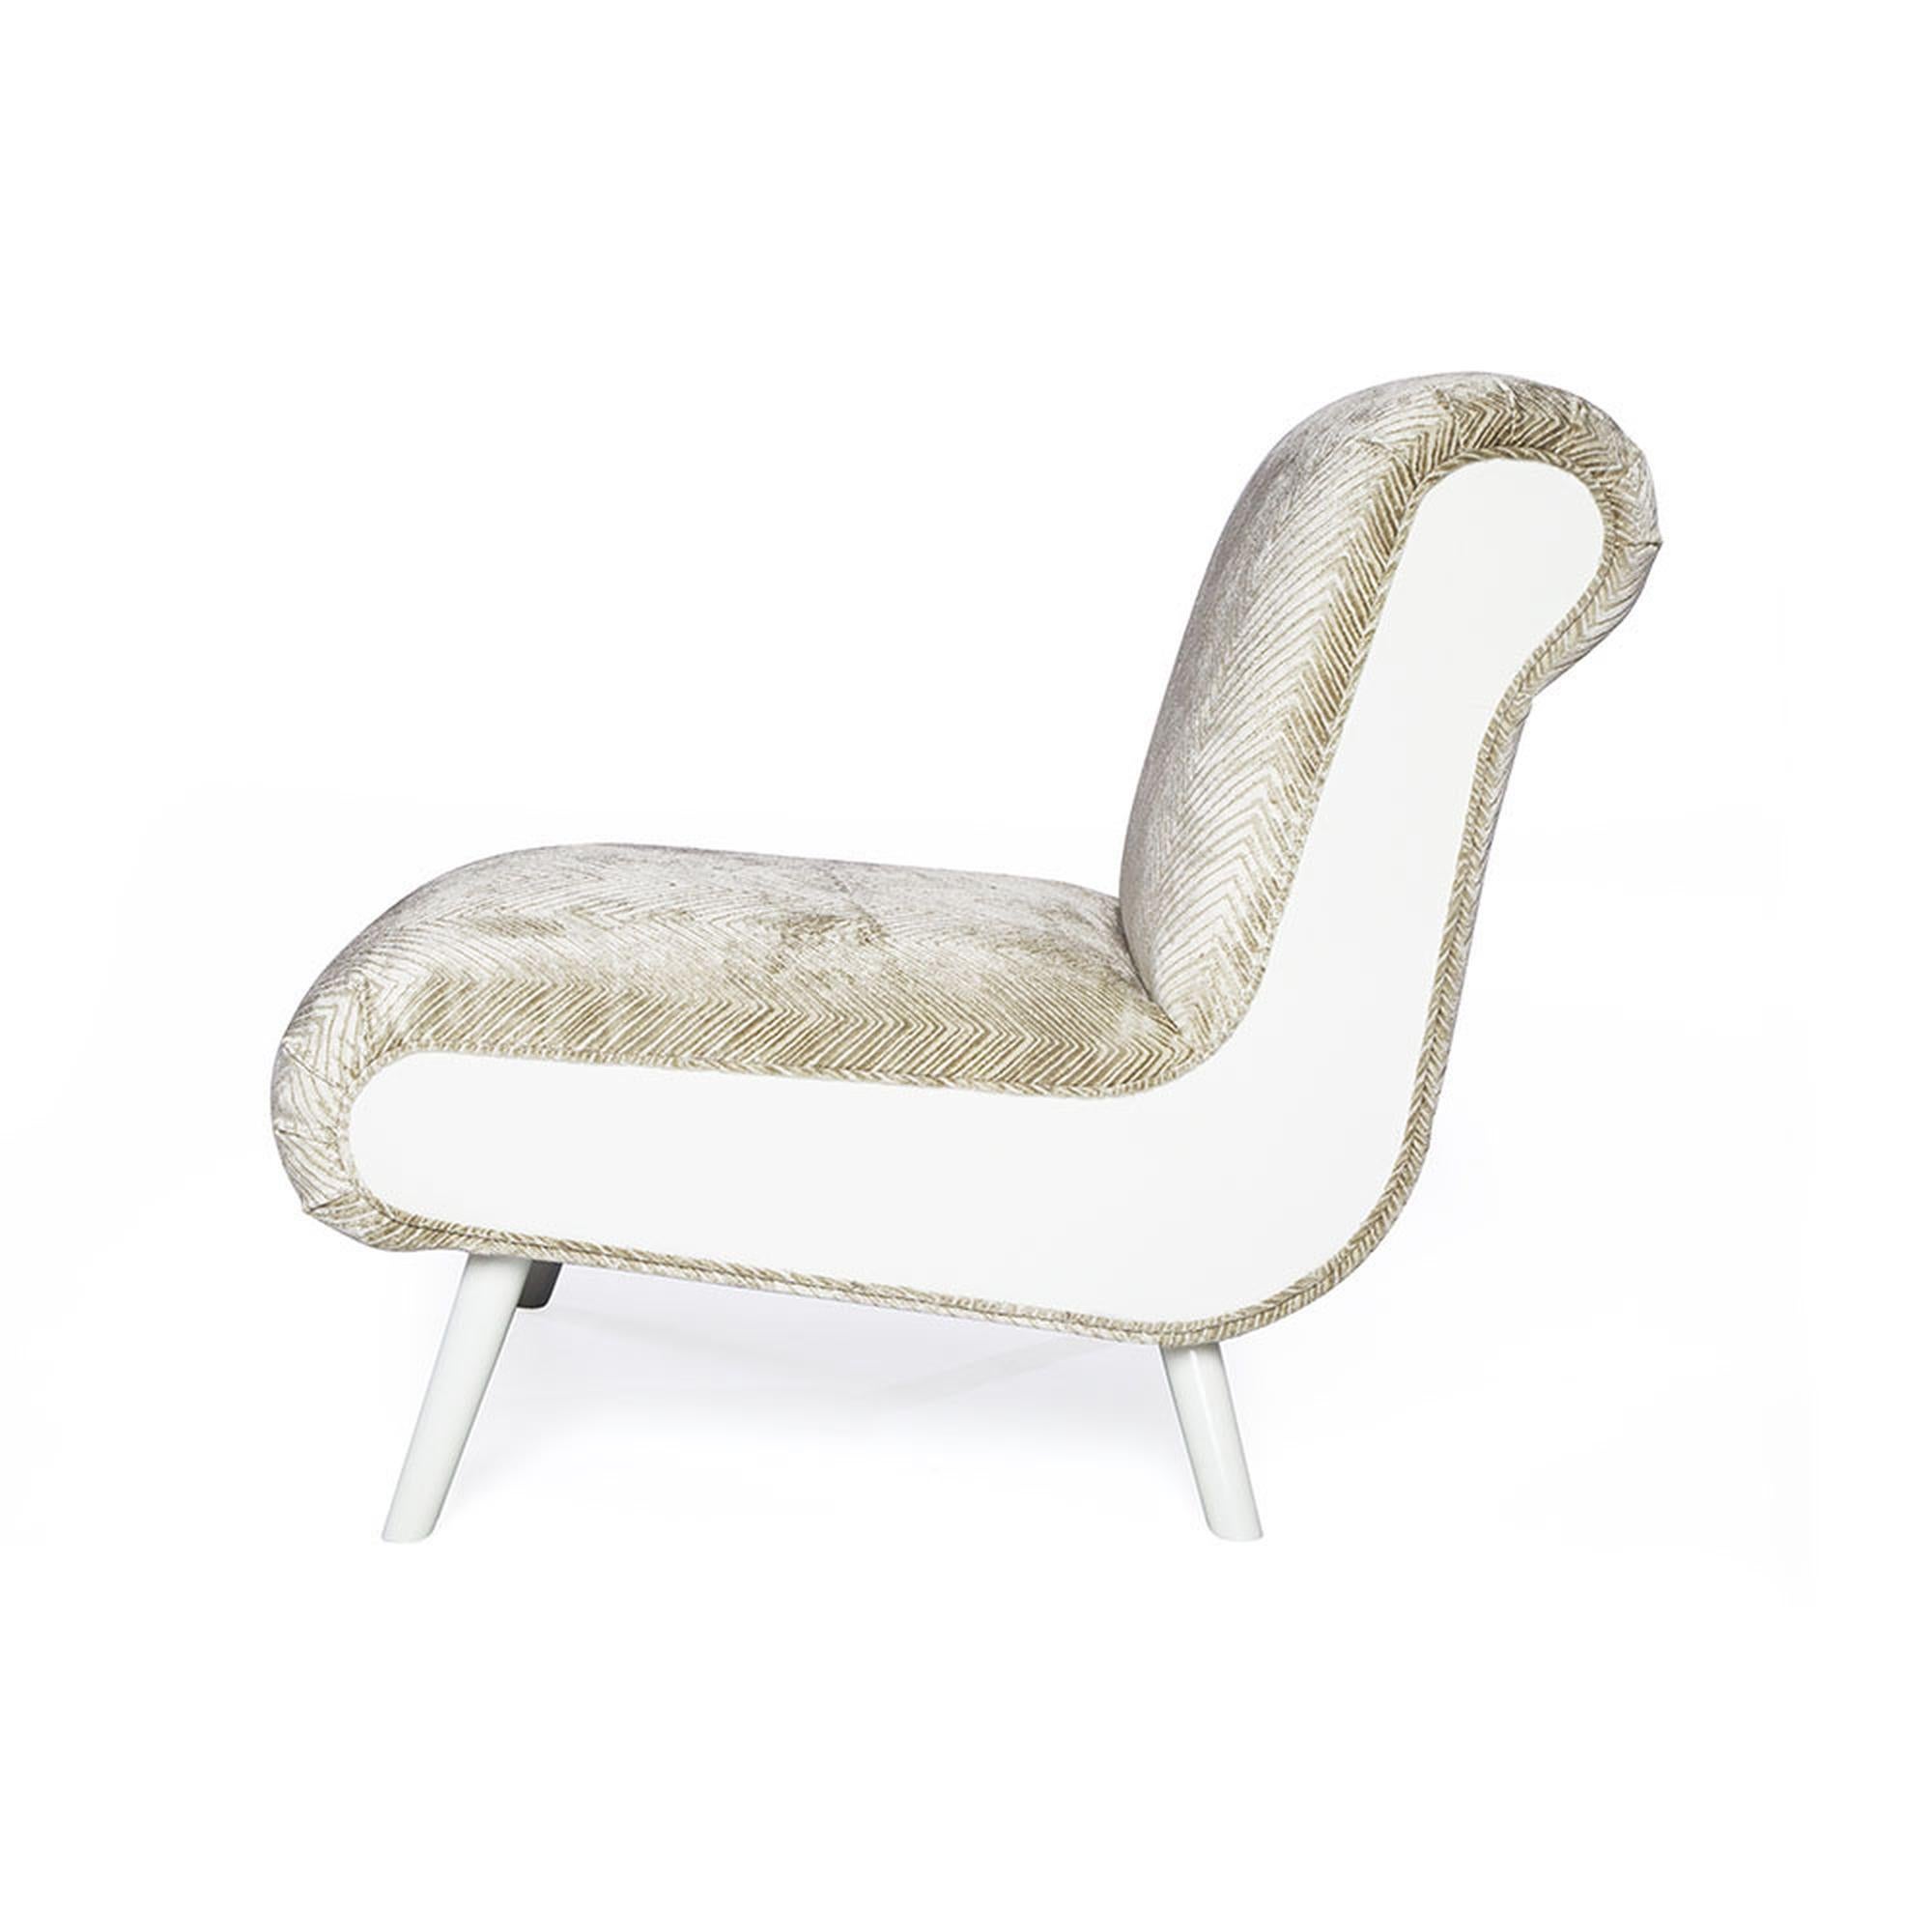 Modern Casablanca Slipper Chair in White Wood and Silver by Innova Luxuxy Group For Sale